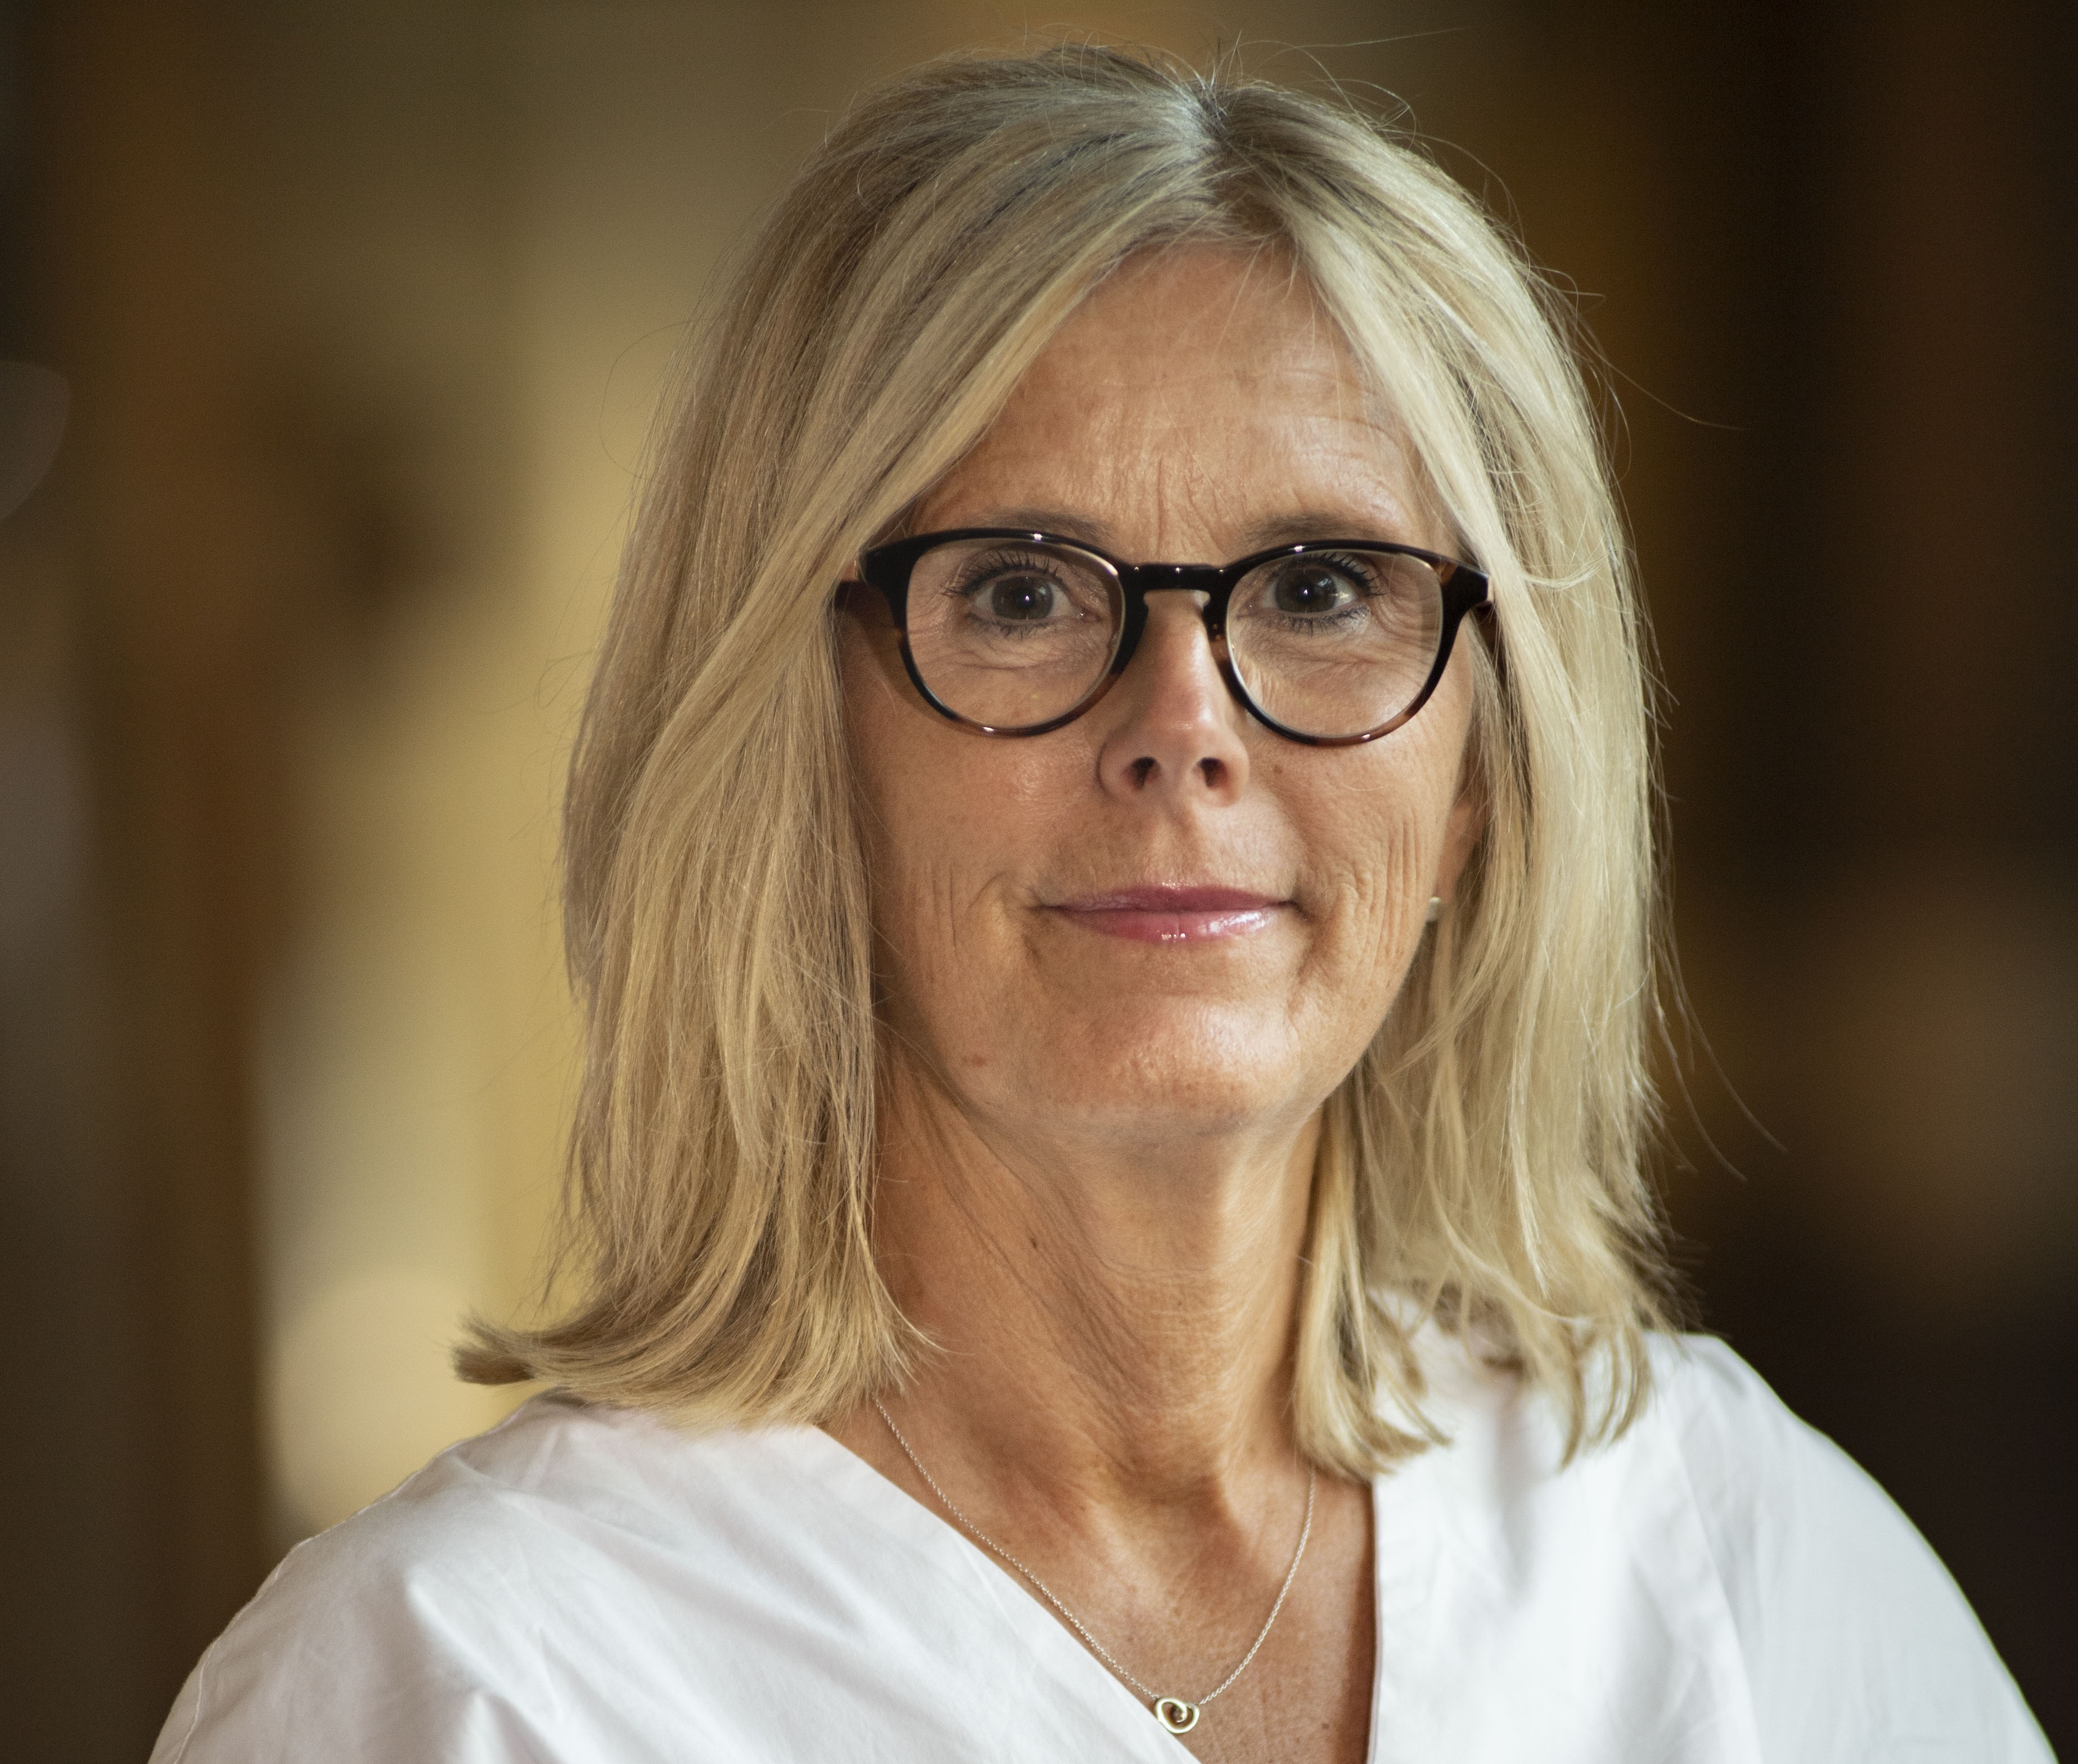 I am Doctor of Philosophy (PhD) in the subject area of Carin Sciences, esp. Nursing Science (2003), an Associate Professor in Perioperative Nursing (2009) and a Professor in Nursing 2012-2018 at Örebro University. I am Doctor of Philosophy (PhD) in the subject area of Carin Sciences, esp. Nursing Science (2003), an Associate Professor in Perioperative Nursing (2009) and a Professor in Nursing 2012-2018 at Ã–rebro University. I am Doctor of Philosophy (PhD) in the subject area of Carin Sciences, esp. Nursing Science (2003), an Associate Professor in Perioperative Nursing (2009) and a Professor in Nursing 2012-2018 at Örebro University.